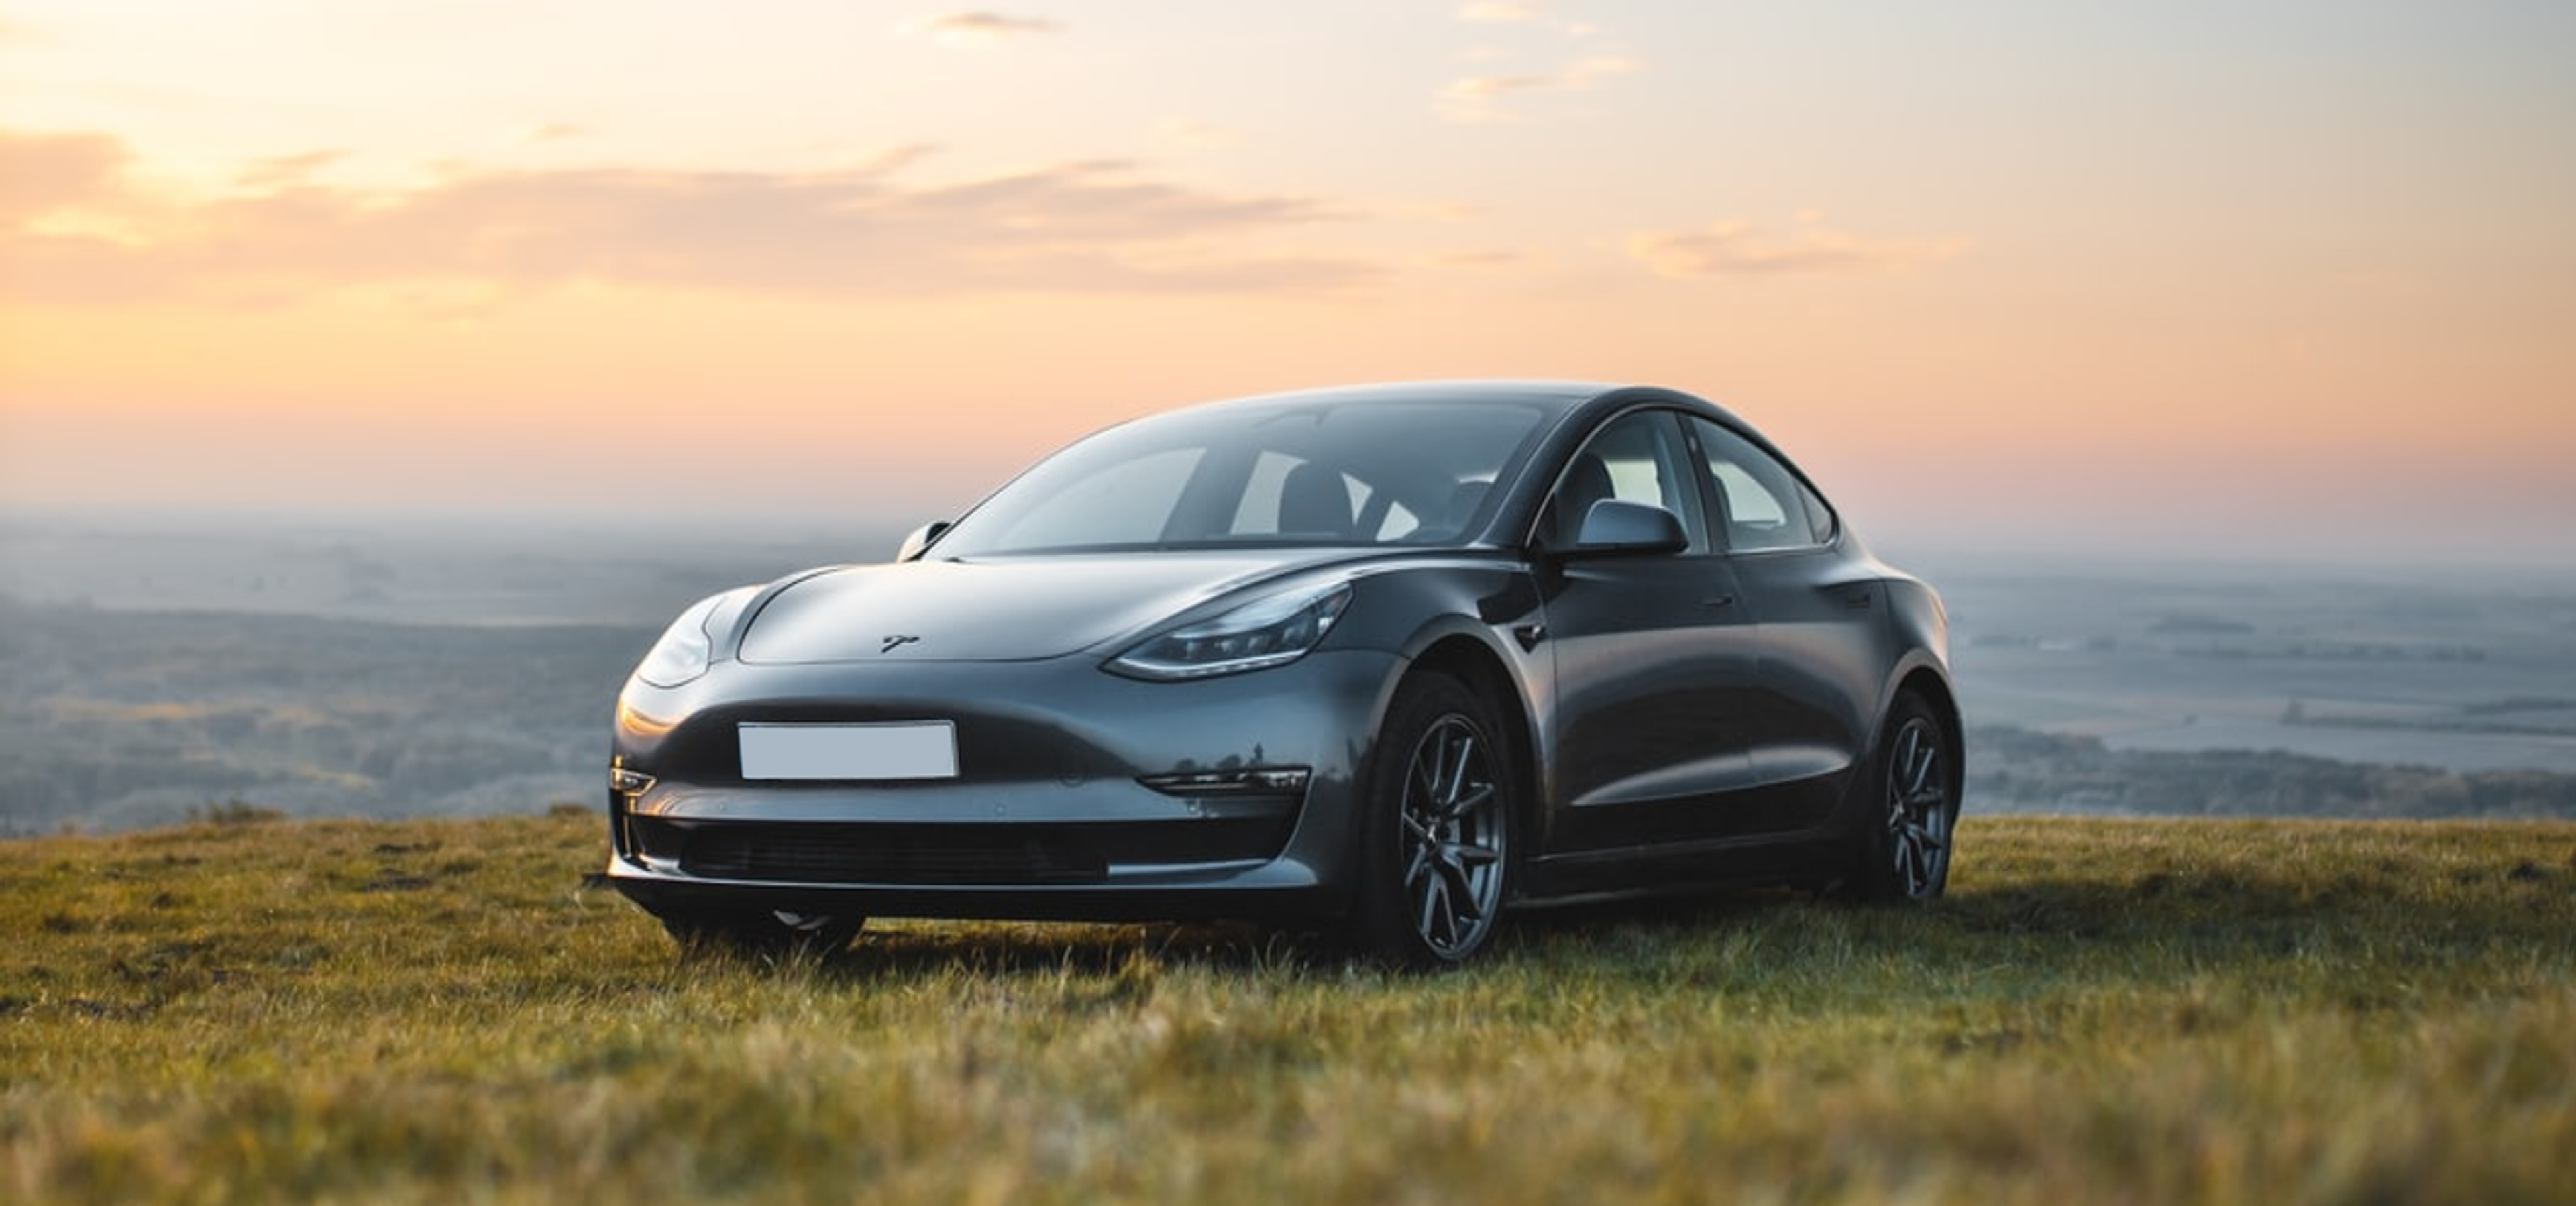 Grey Tesla parked on a hill with a sunset or sunrise in the background